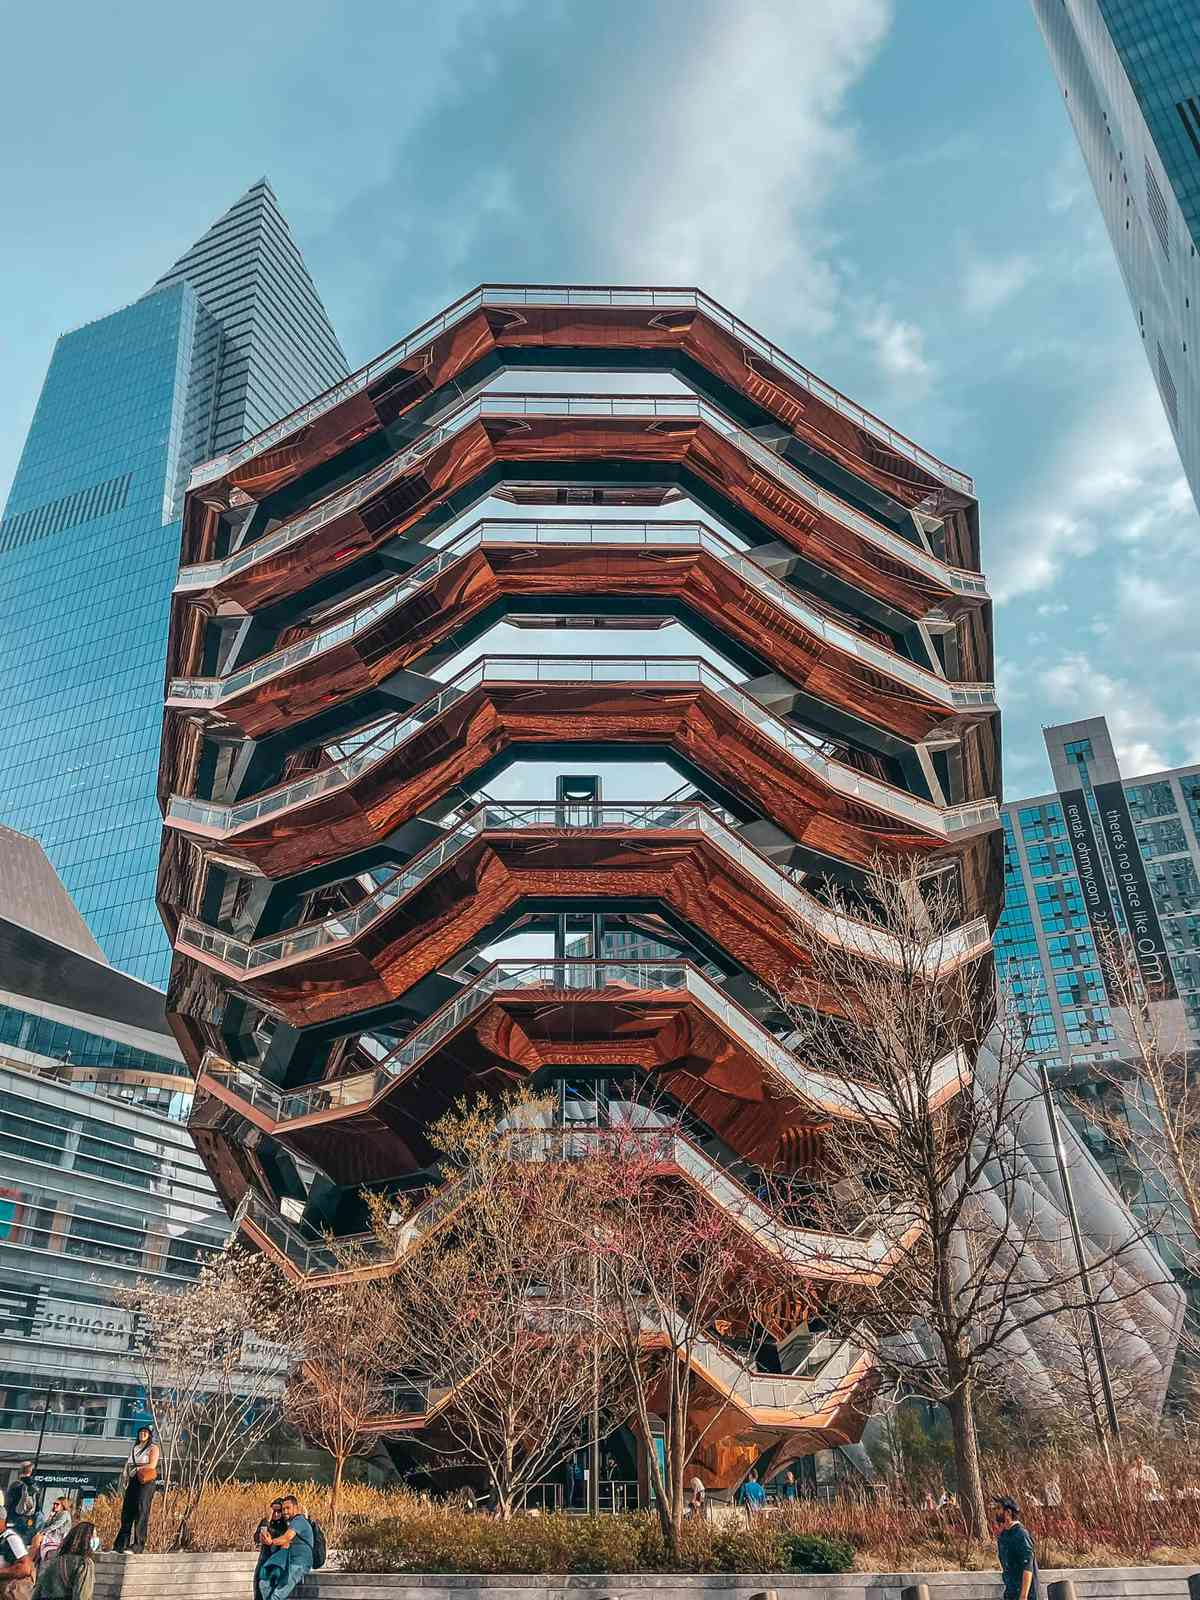 The Vessel at Hudson Yards in NYC